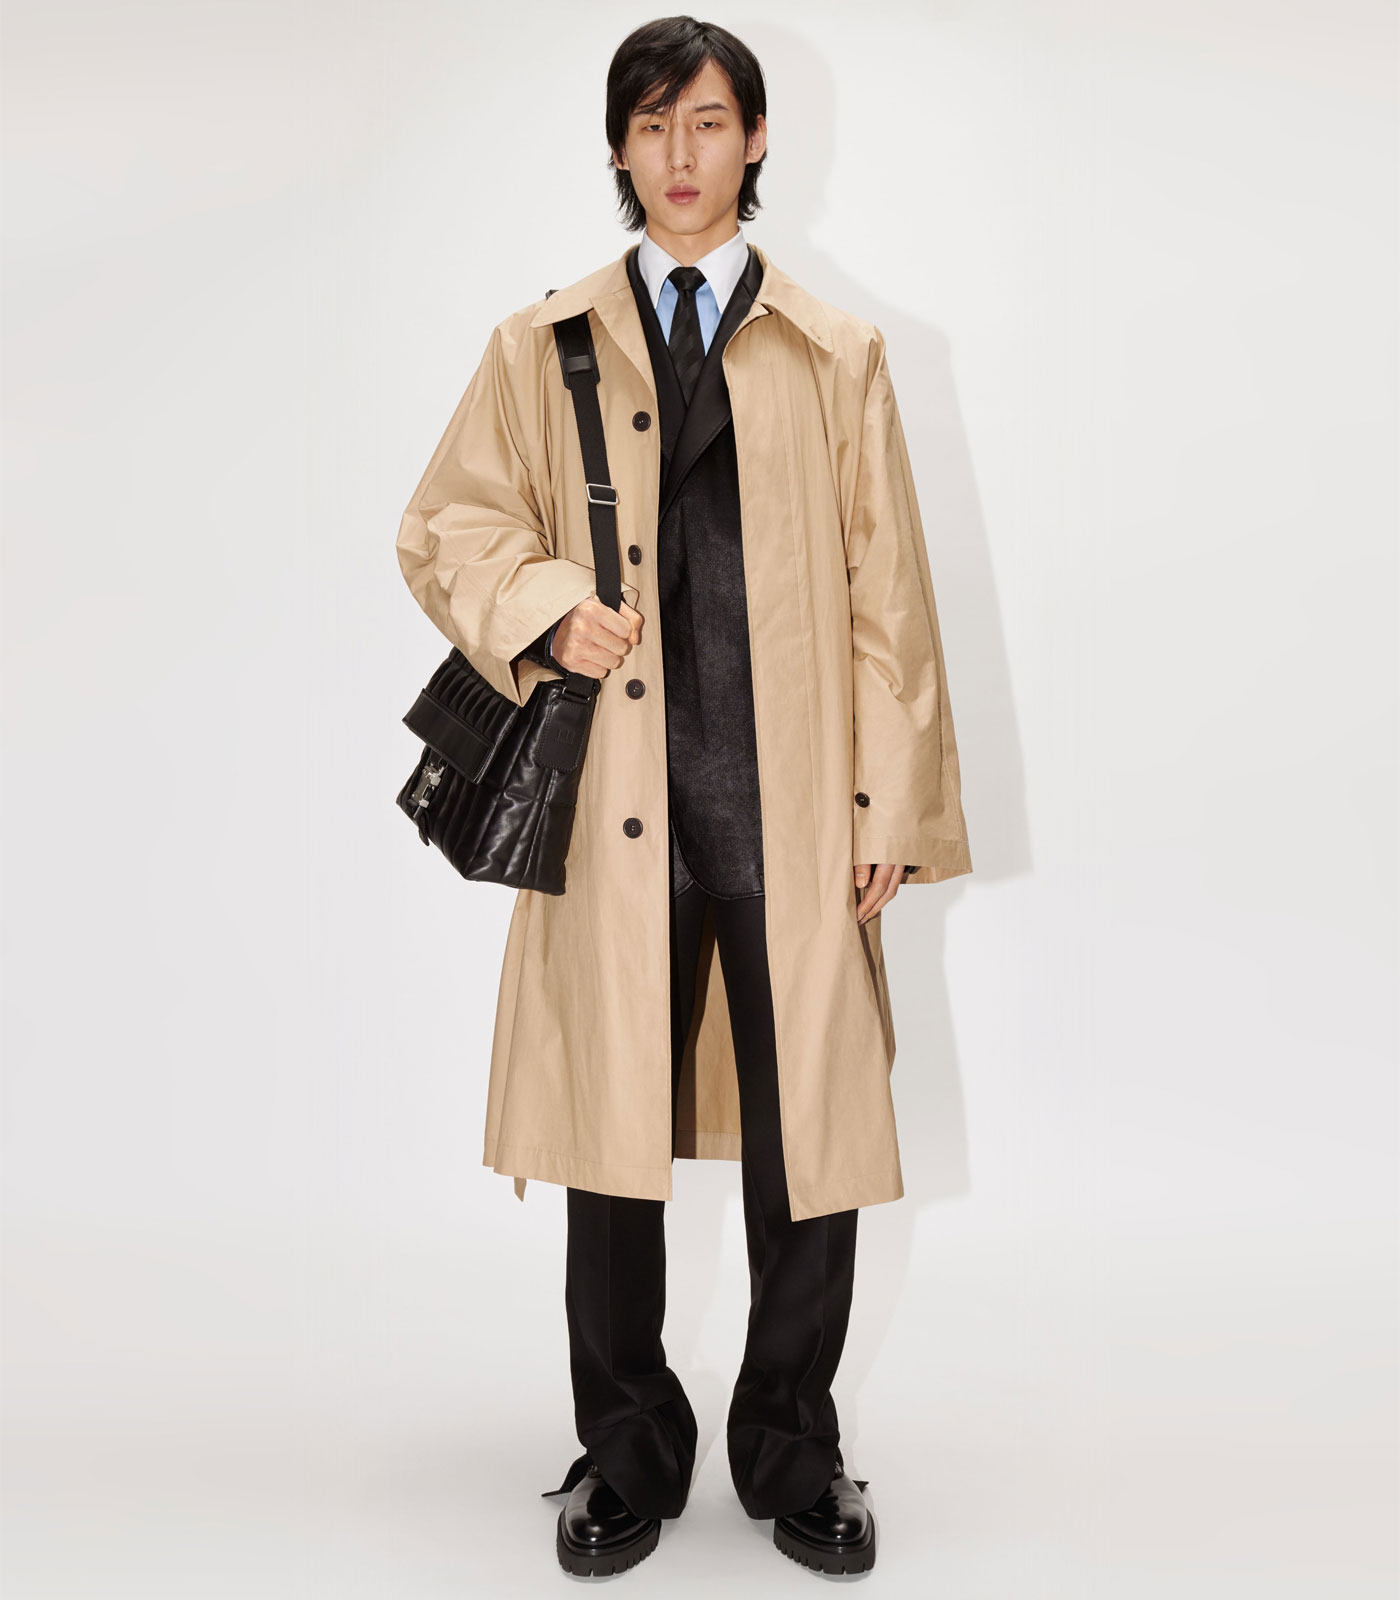 Dunhill Focuses On Tailoring With New ‘Uniform’ Collection